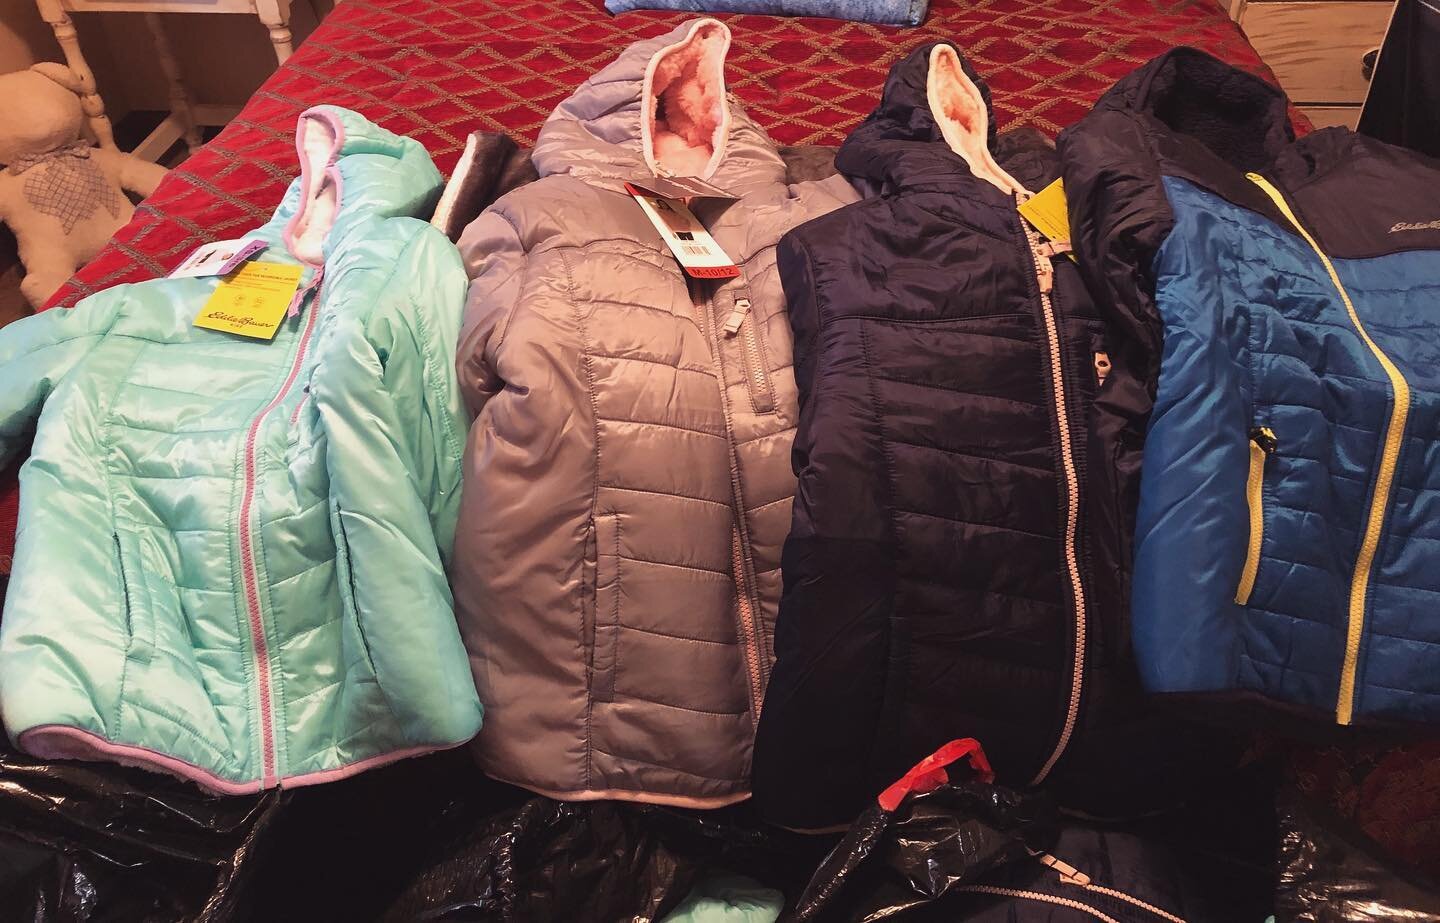 A very generous family donated three huge bags of brand new coats for our children today. ⁣
⁣
Extending a very warm thank you to Jane and Larry! Your support is so deeply appreciated! ⁣
⁣
⁣
⁣
#coatsforkids #kids #kidsinneed #toledooh #toledo #toledoa